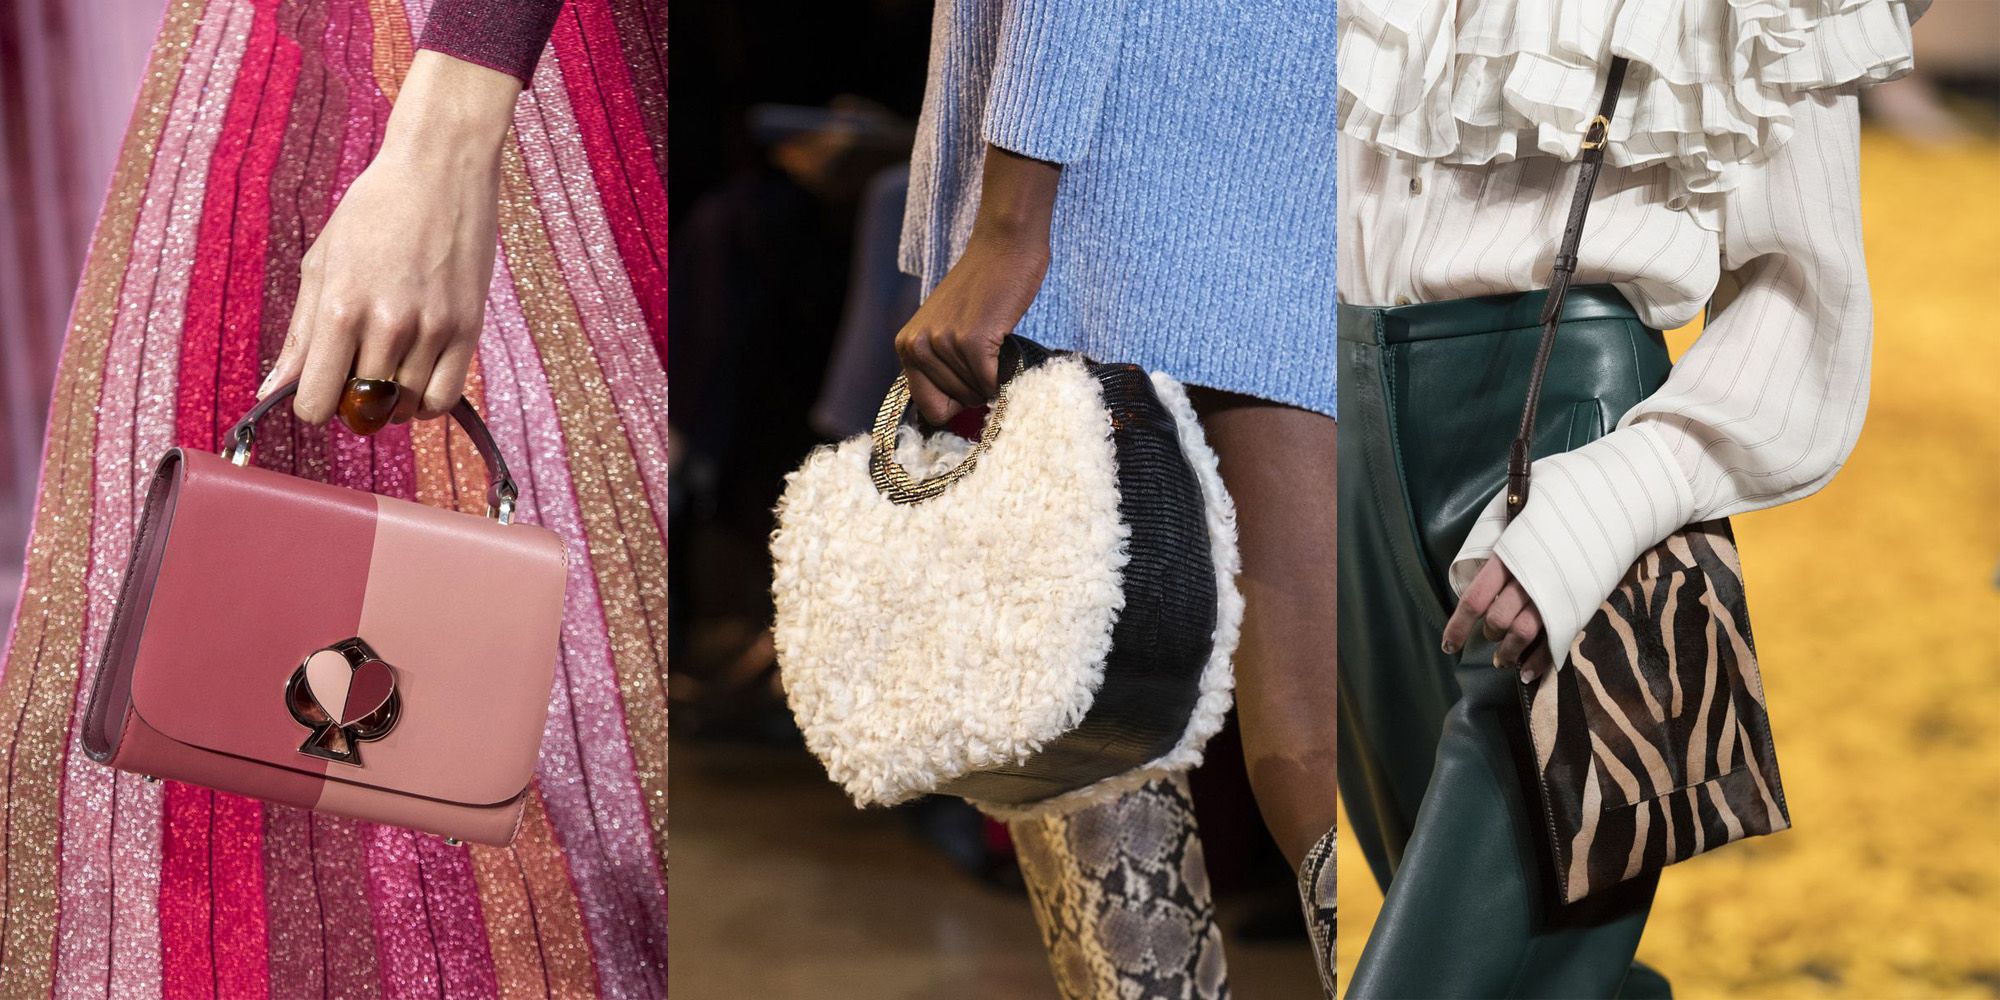 The Best Bags To Wear This Fall 2019 — WOAHSTYLE